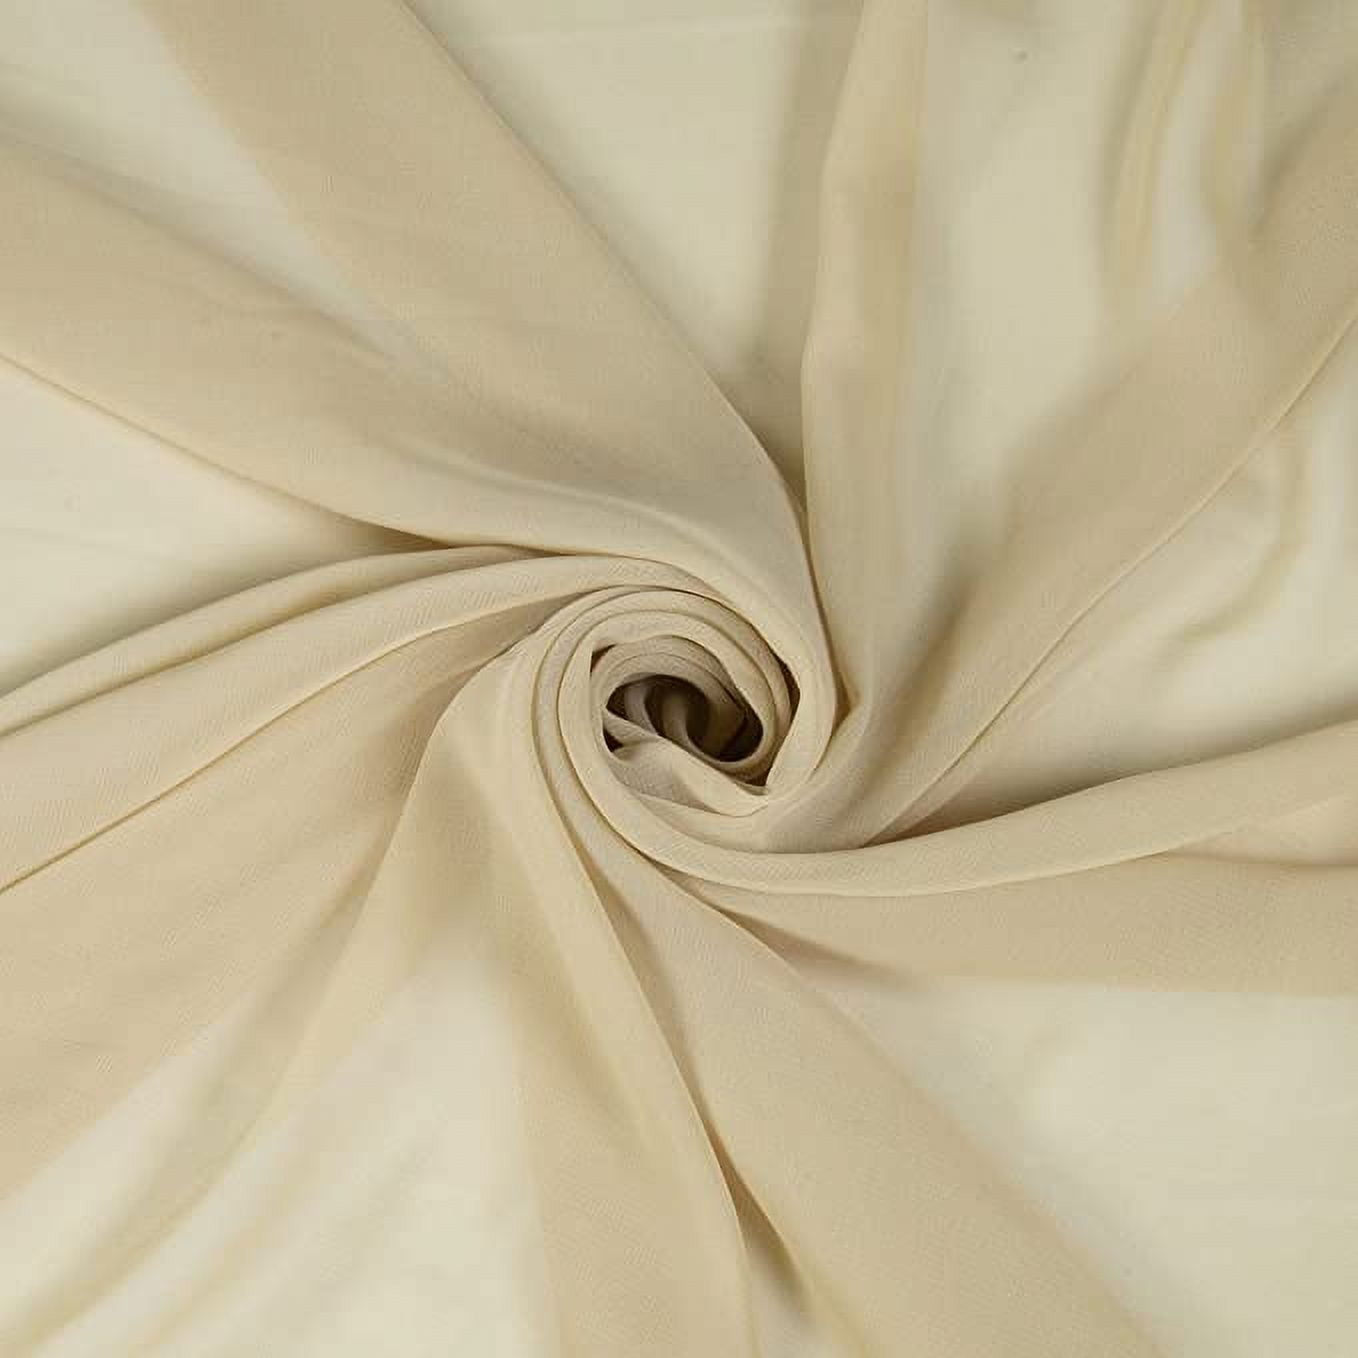  Fashion Shiny Bright Silky Linen Designer Fabric Colored Flax  Fabric for Clothing Wedding Dresses Decorations by The Meter 12 150cmx0.5M  : Clothing, Shoes & Jewelry